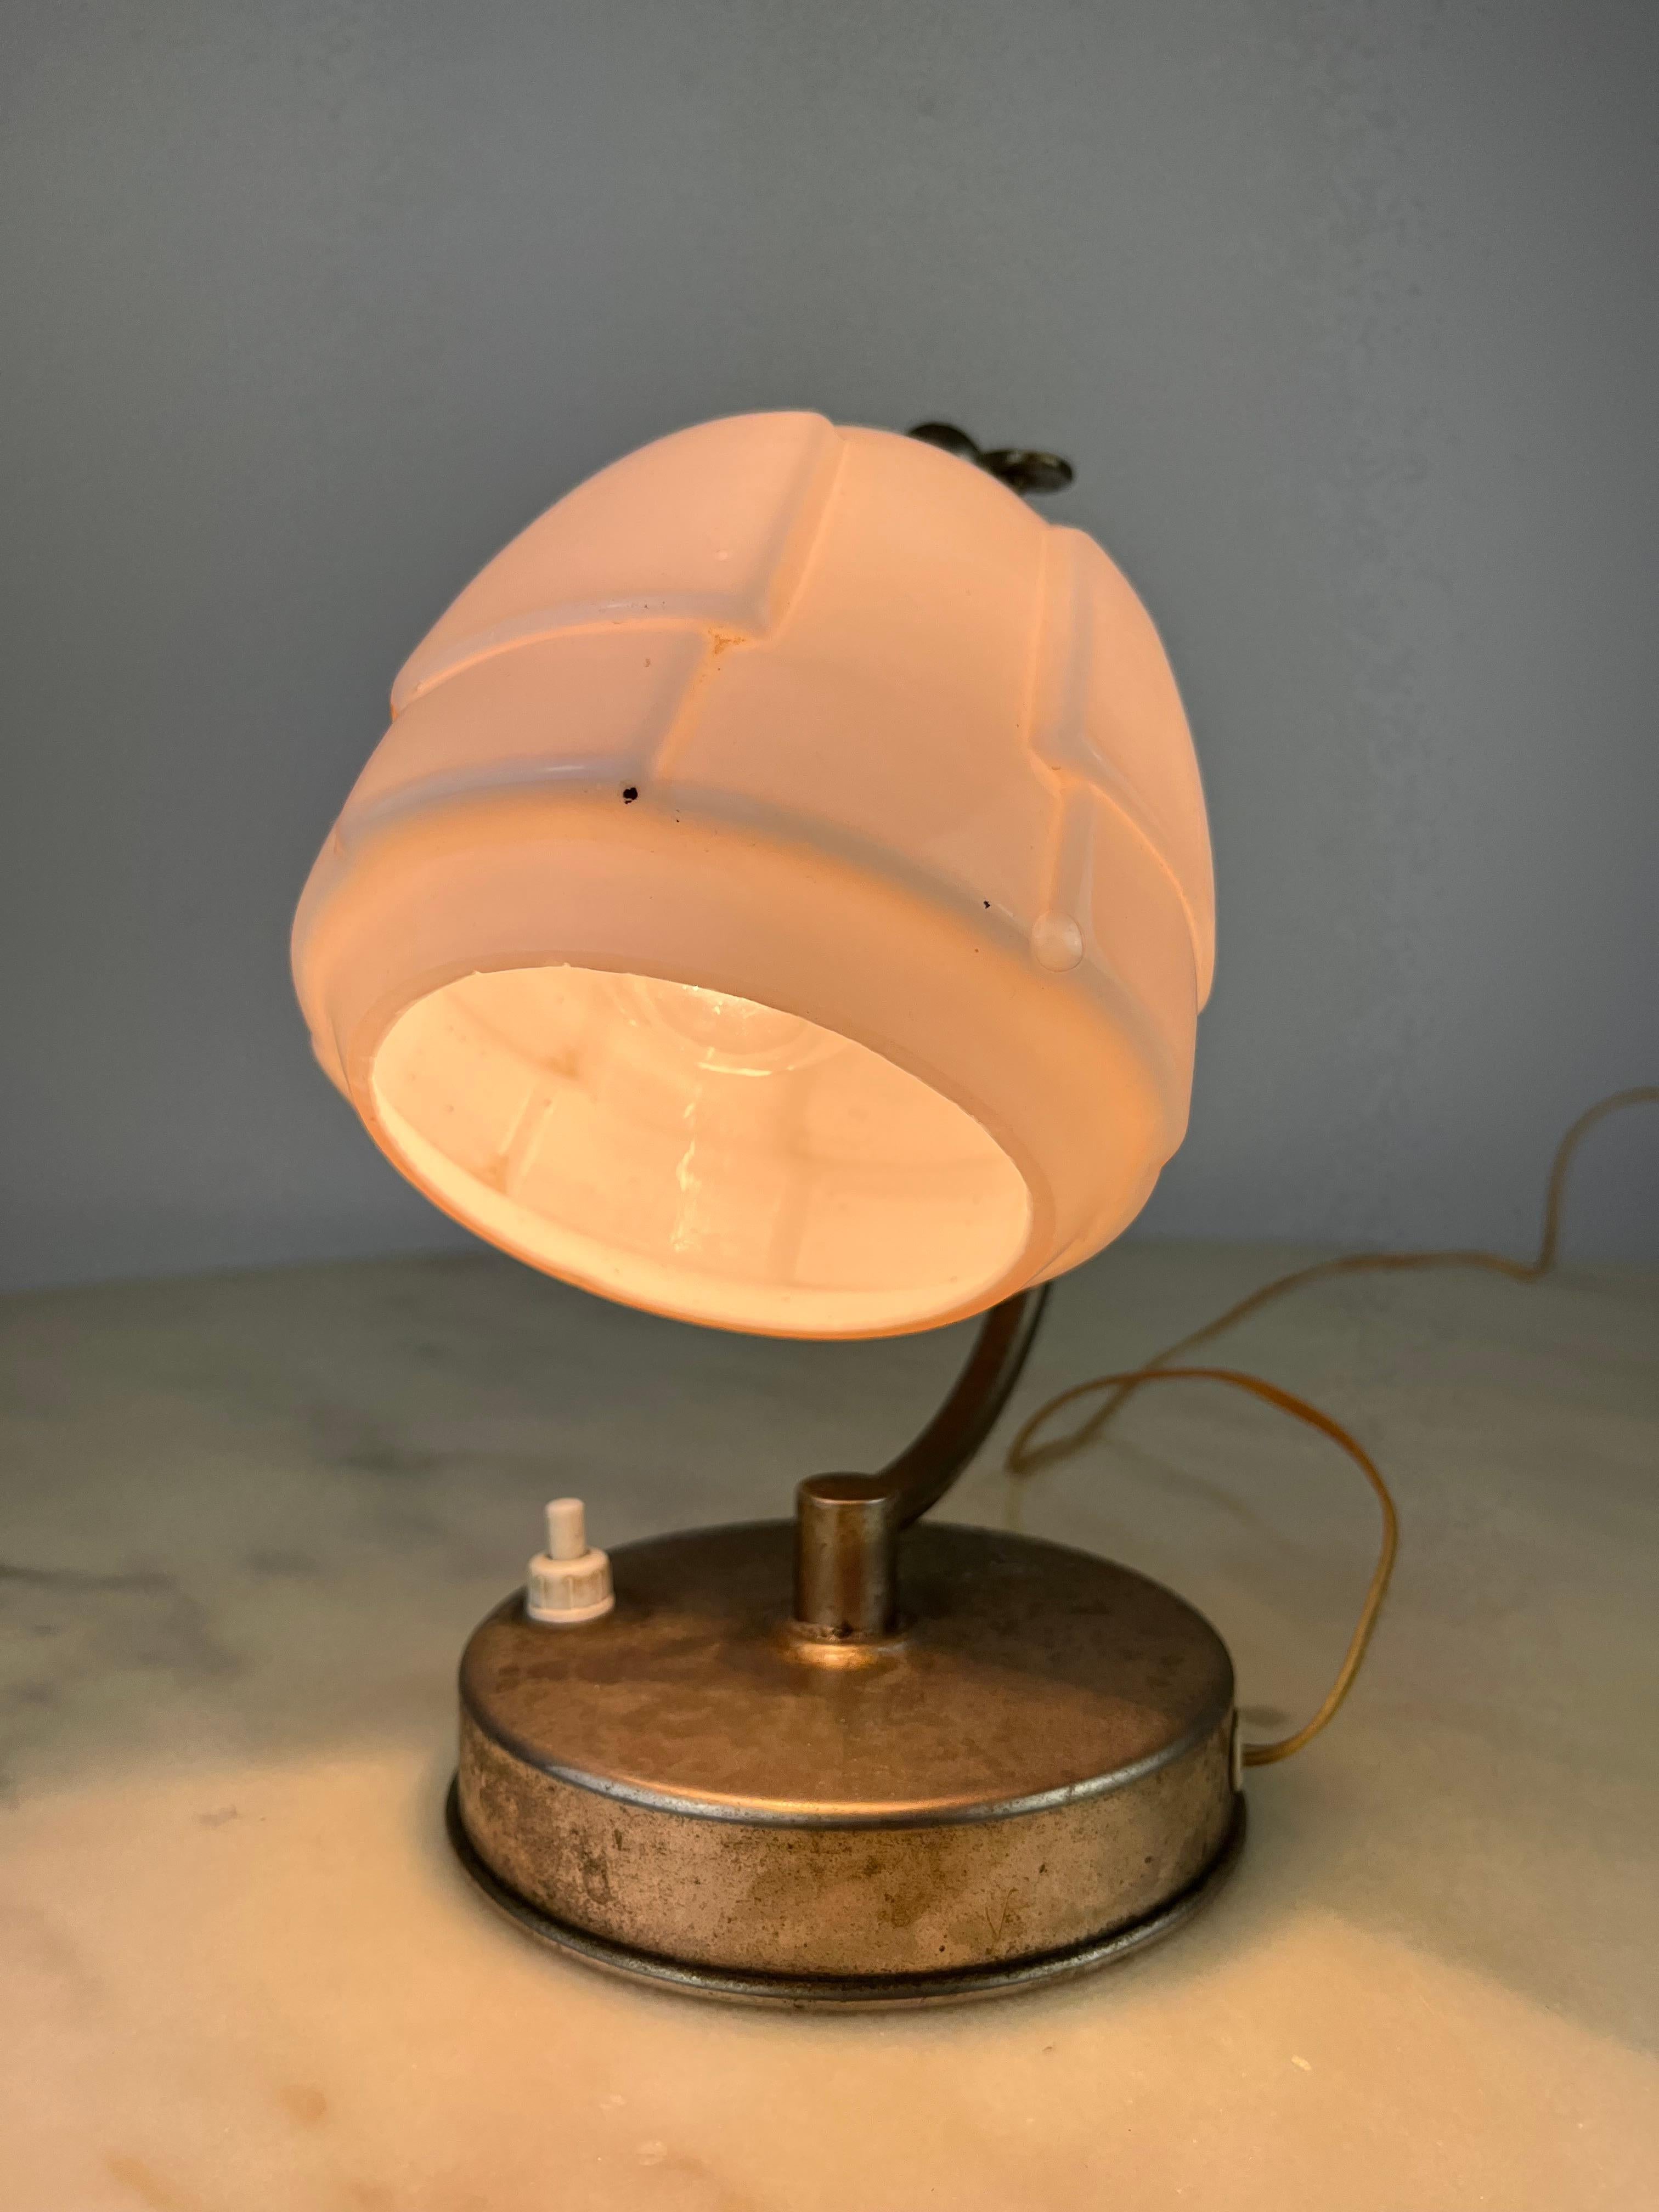 Bedside lamp in metal and glass, Italy, 1940s.
In working order, found in a noble apartment. Small signs of age and use.